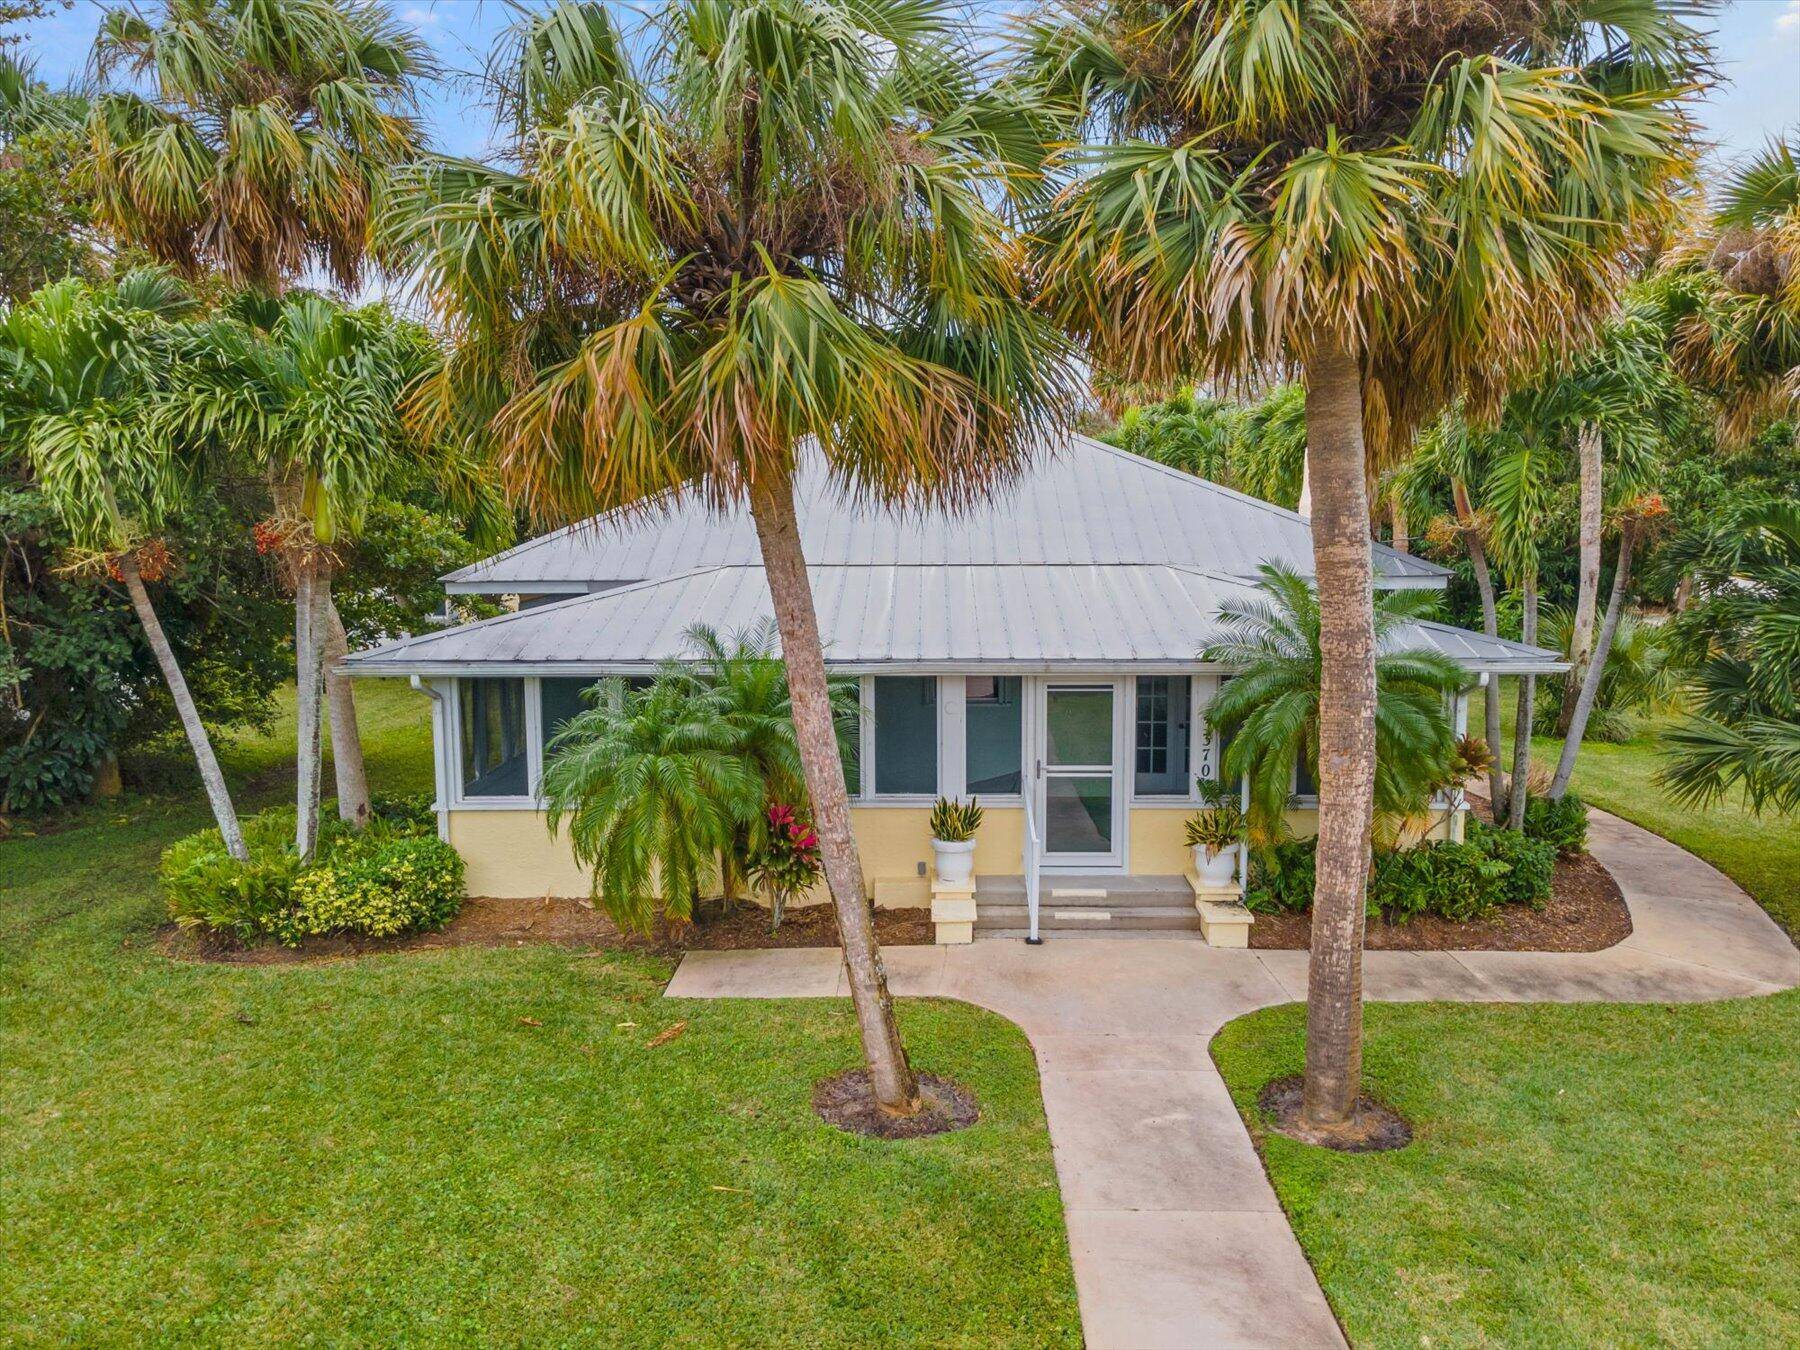 Nostalgia beckons from the bygone era with this opportunity to reside in Downtown Jensen Beach directly across from the Intracoastal Waterway.